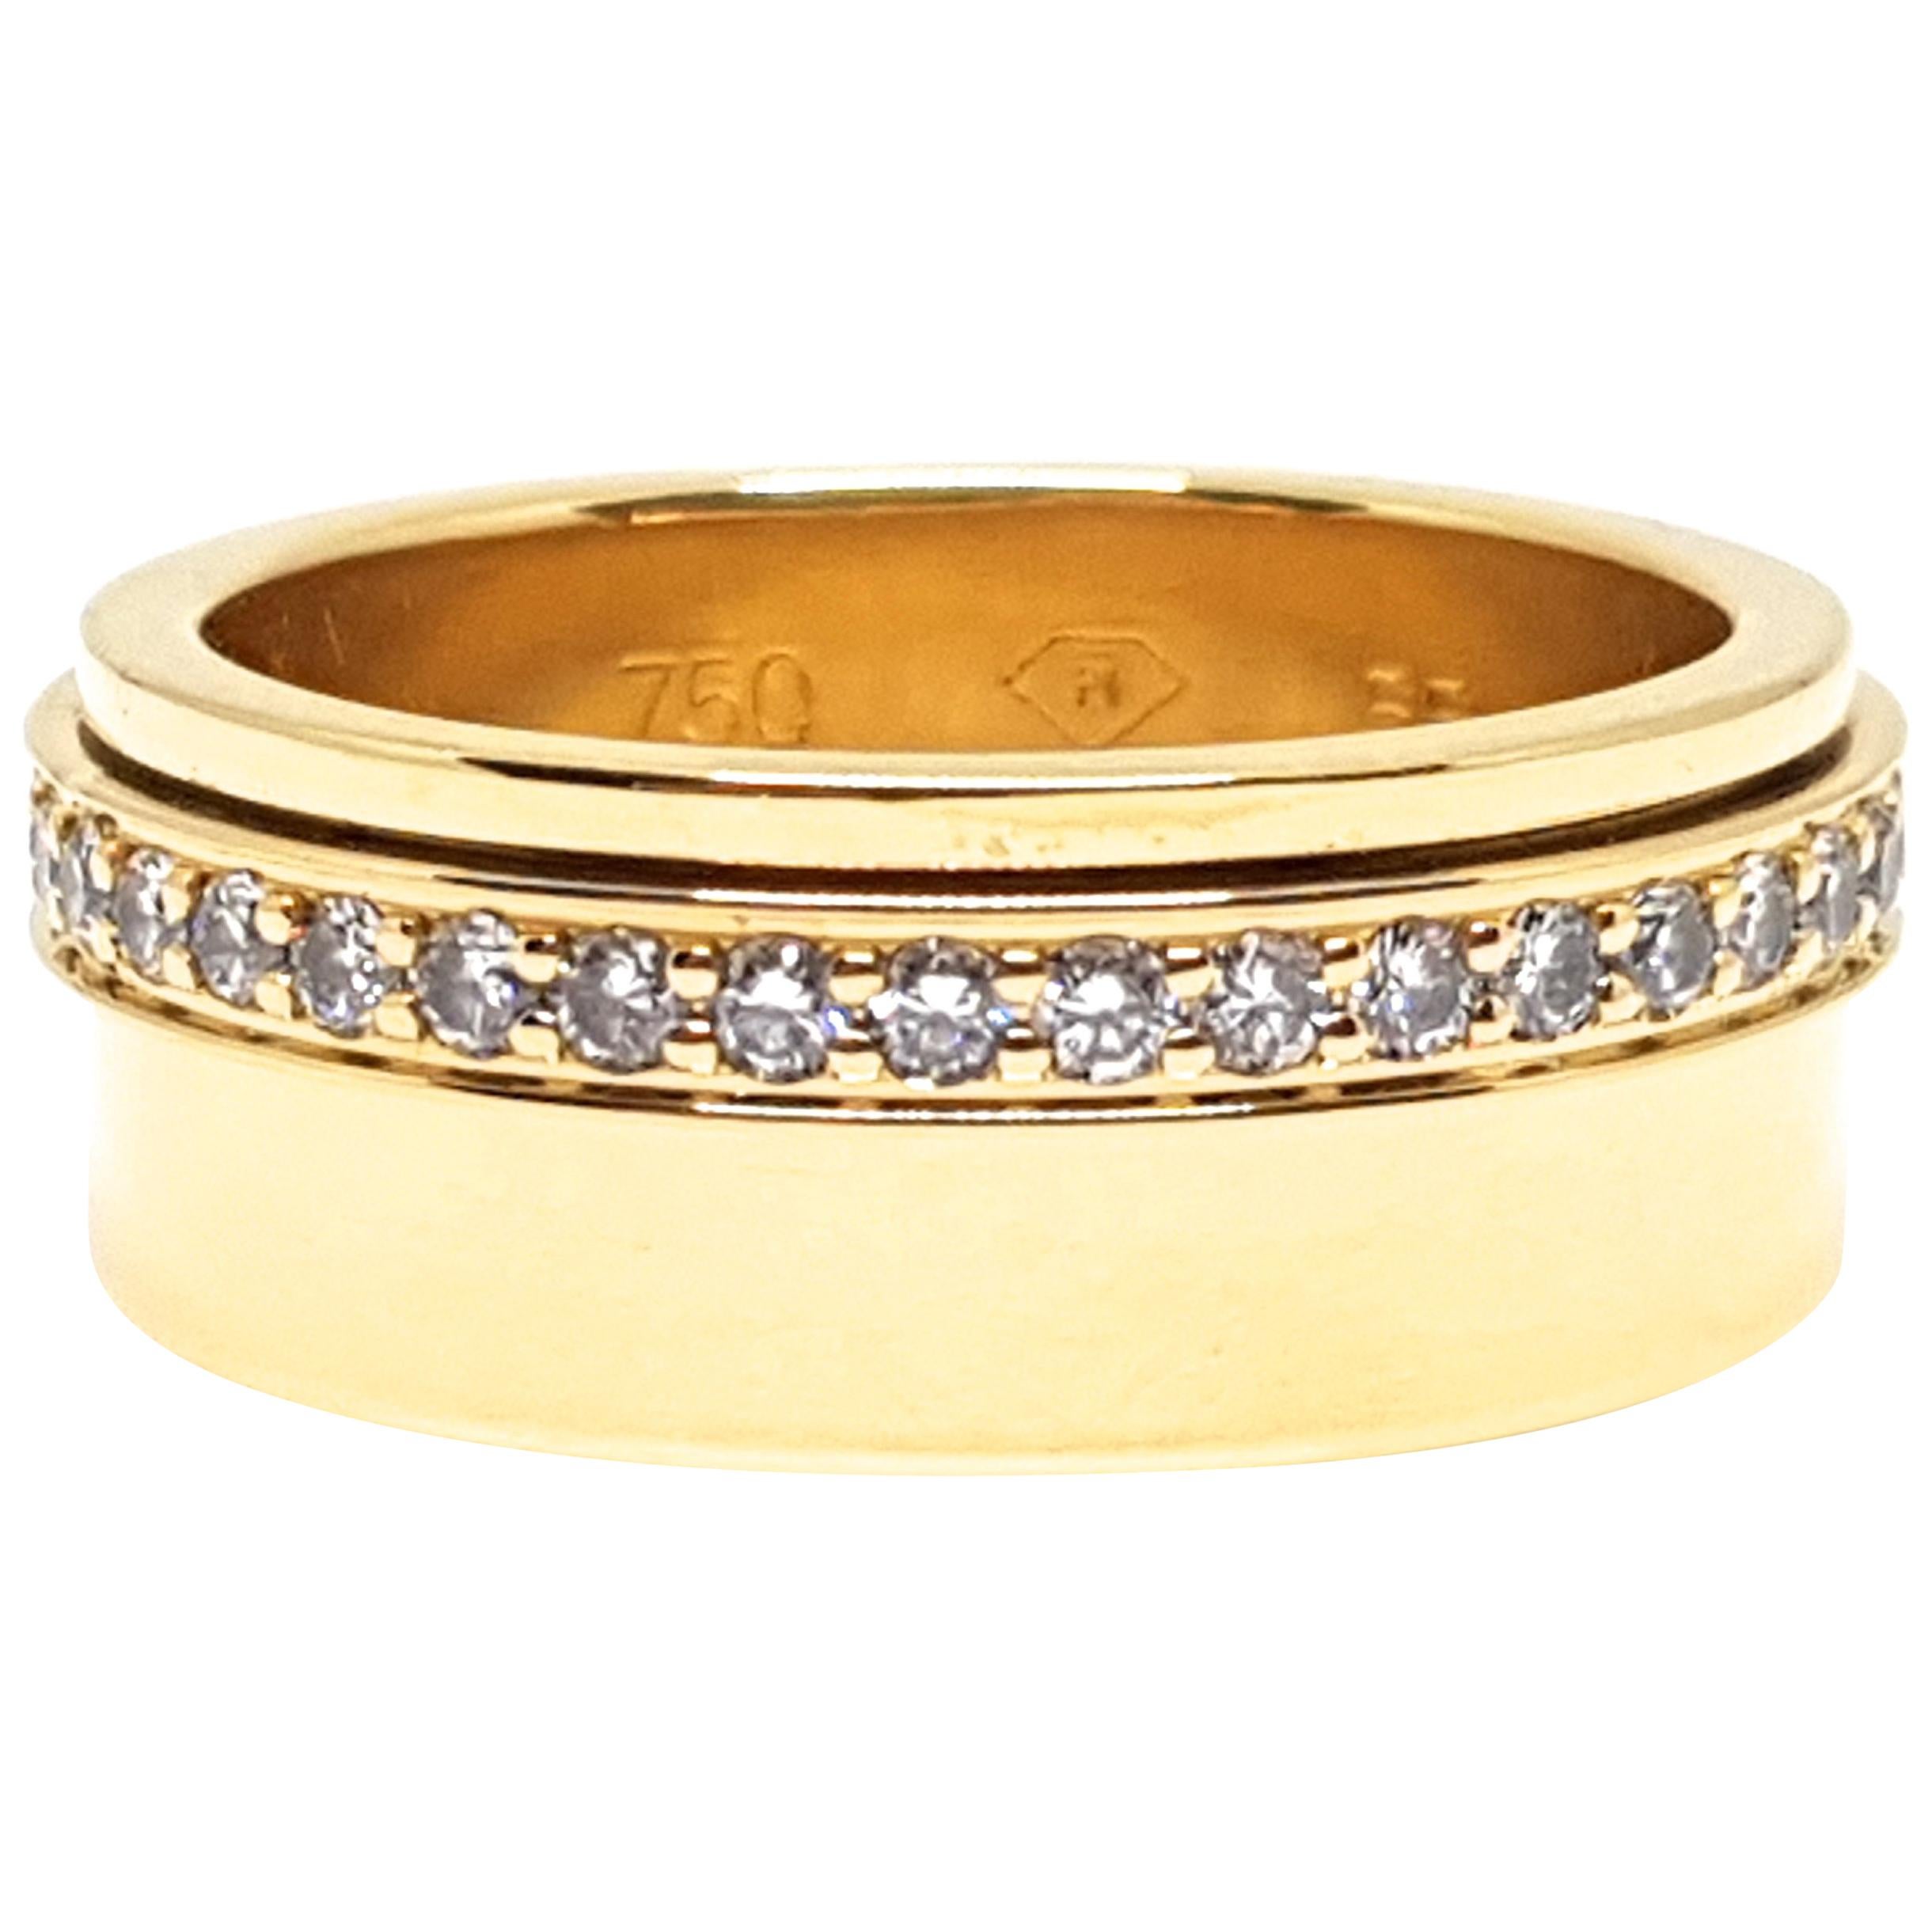 Piaget Possession Yellow Gold Ring